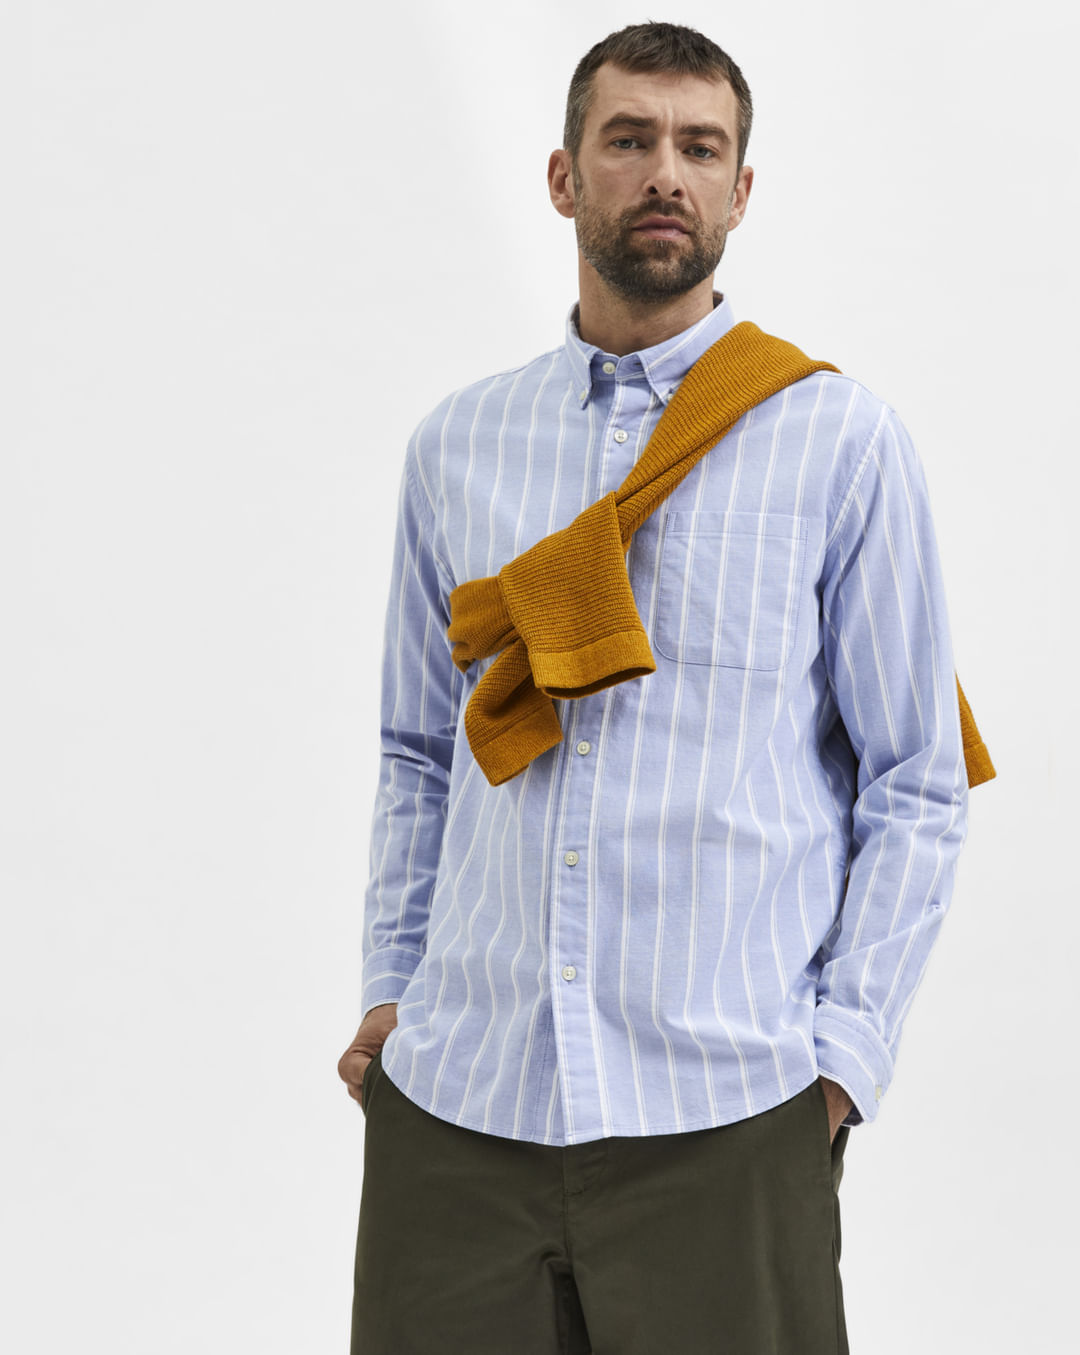 Full Striped Light SELECTED Shirt Online Sleeves HOMME Blue |283936801 Buy at